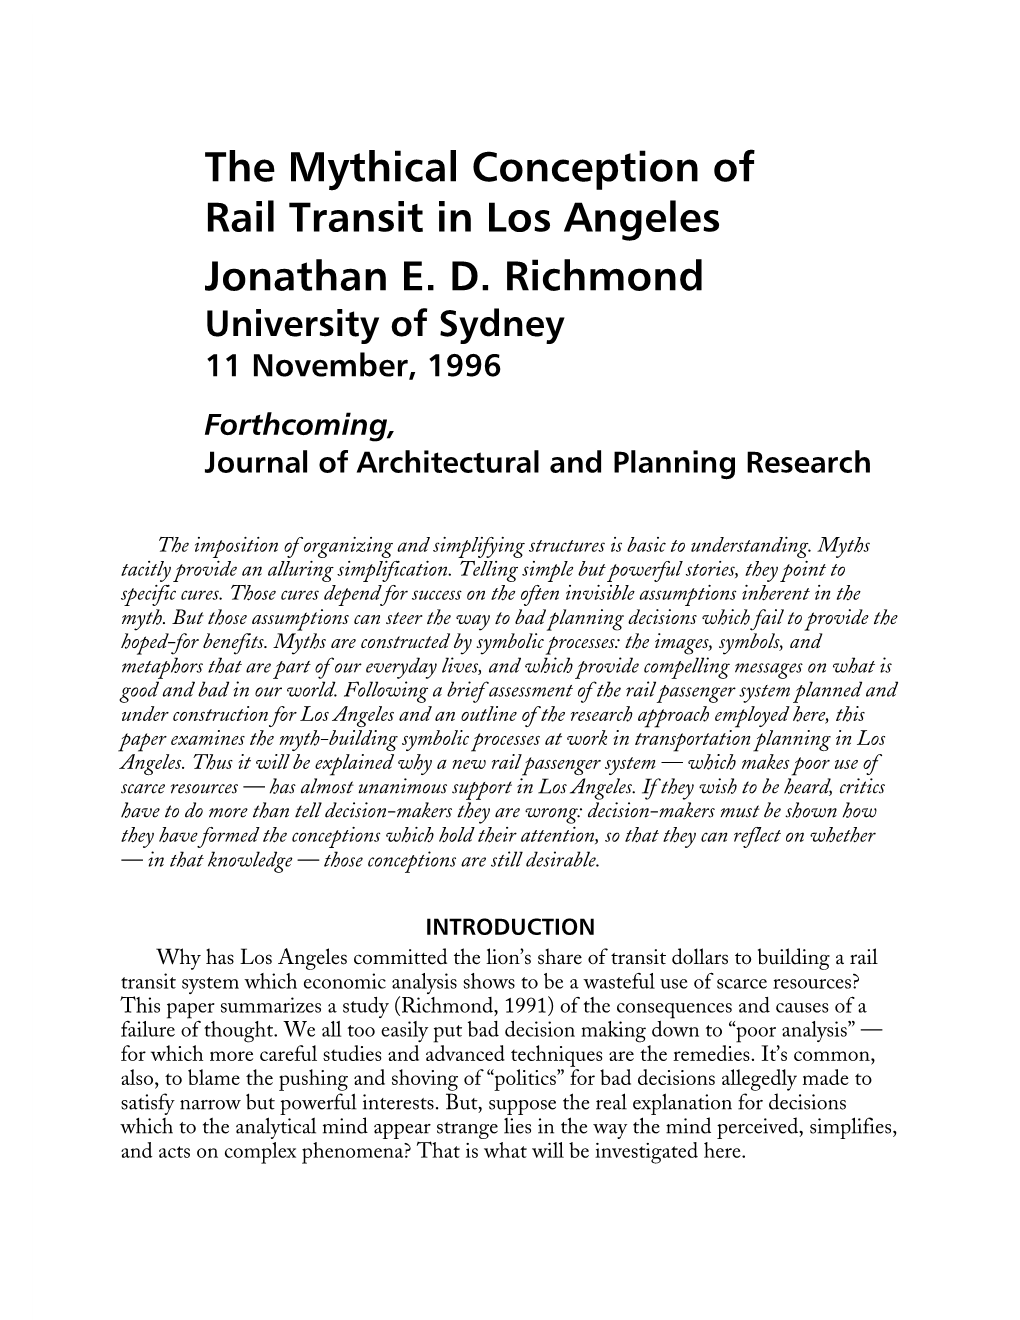 The Mythical Conception of Rail Transit in Los Angeles Jonathan E